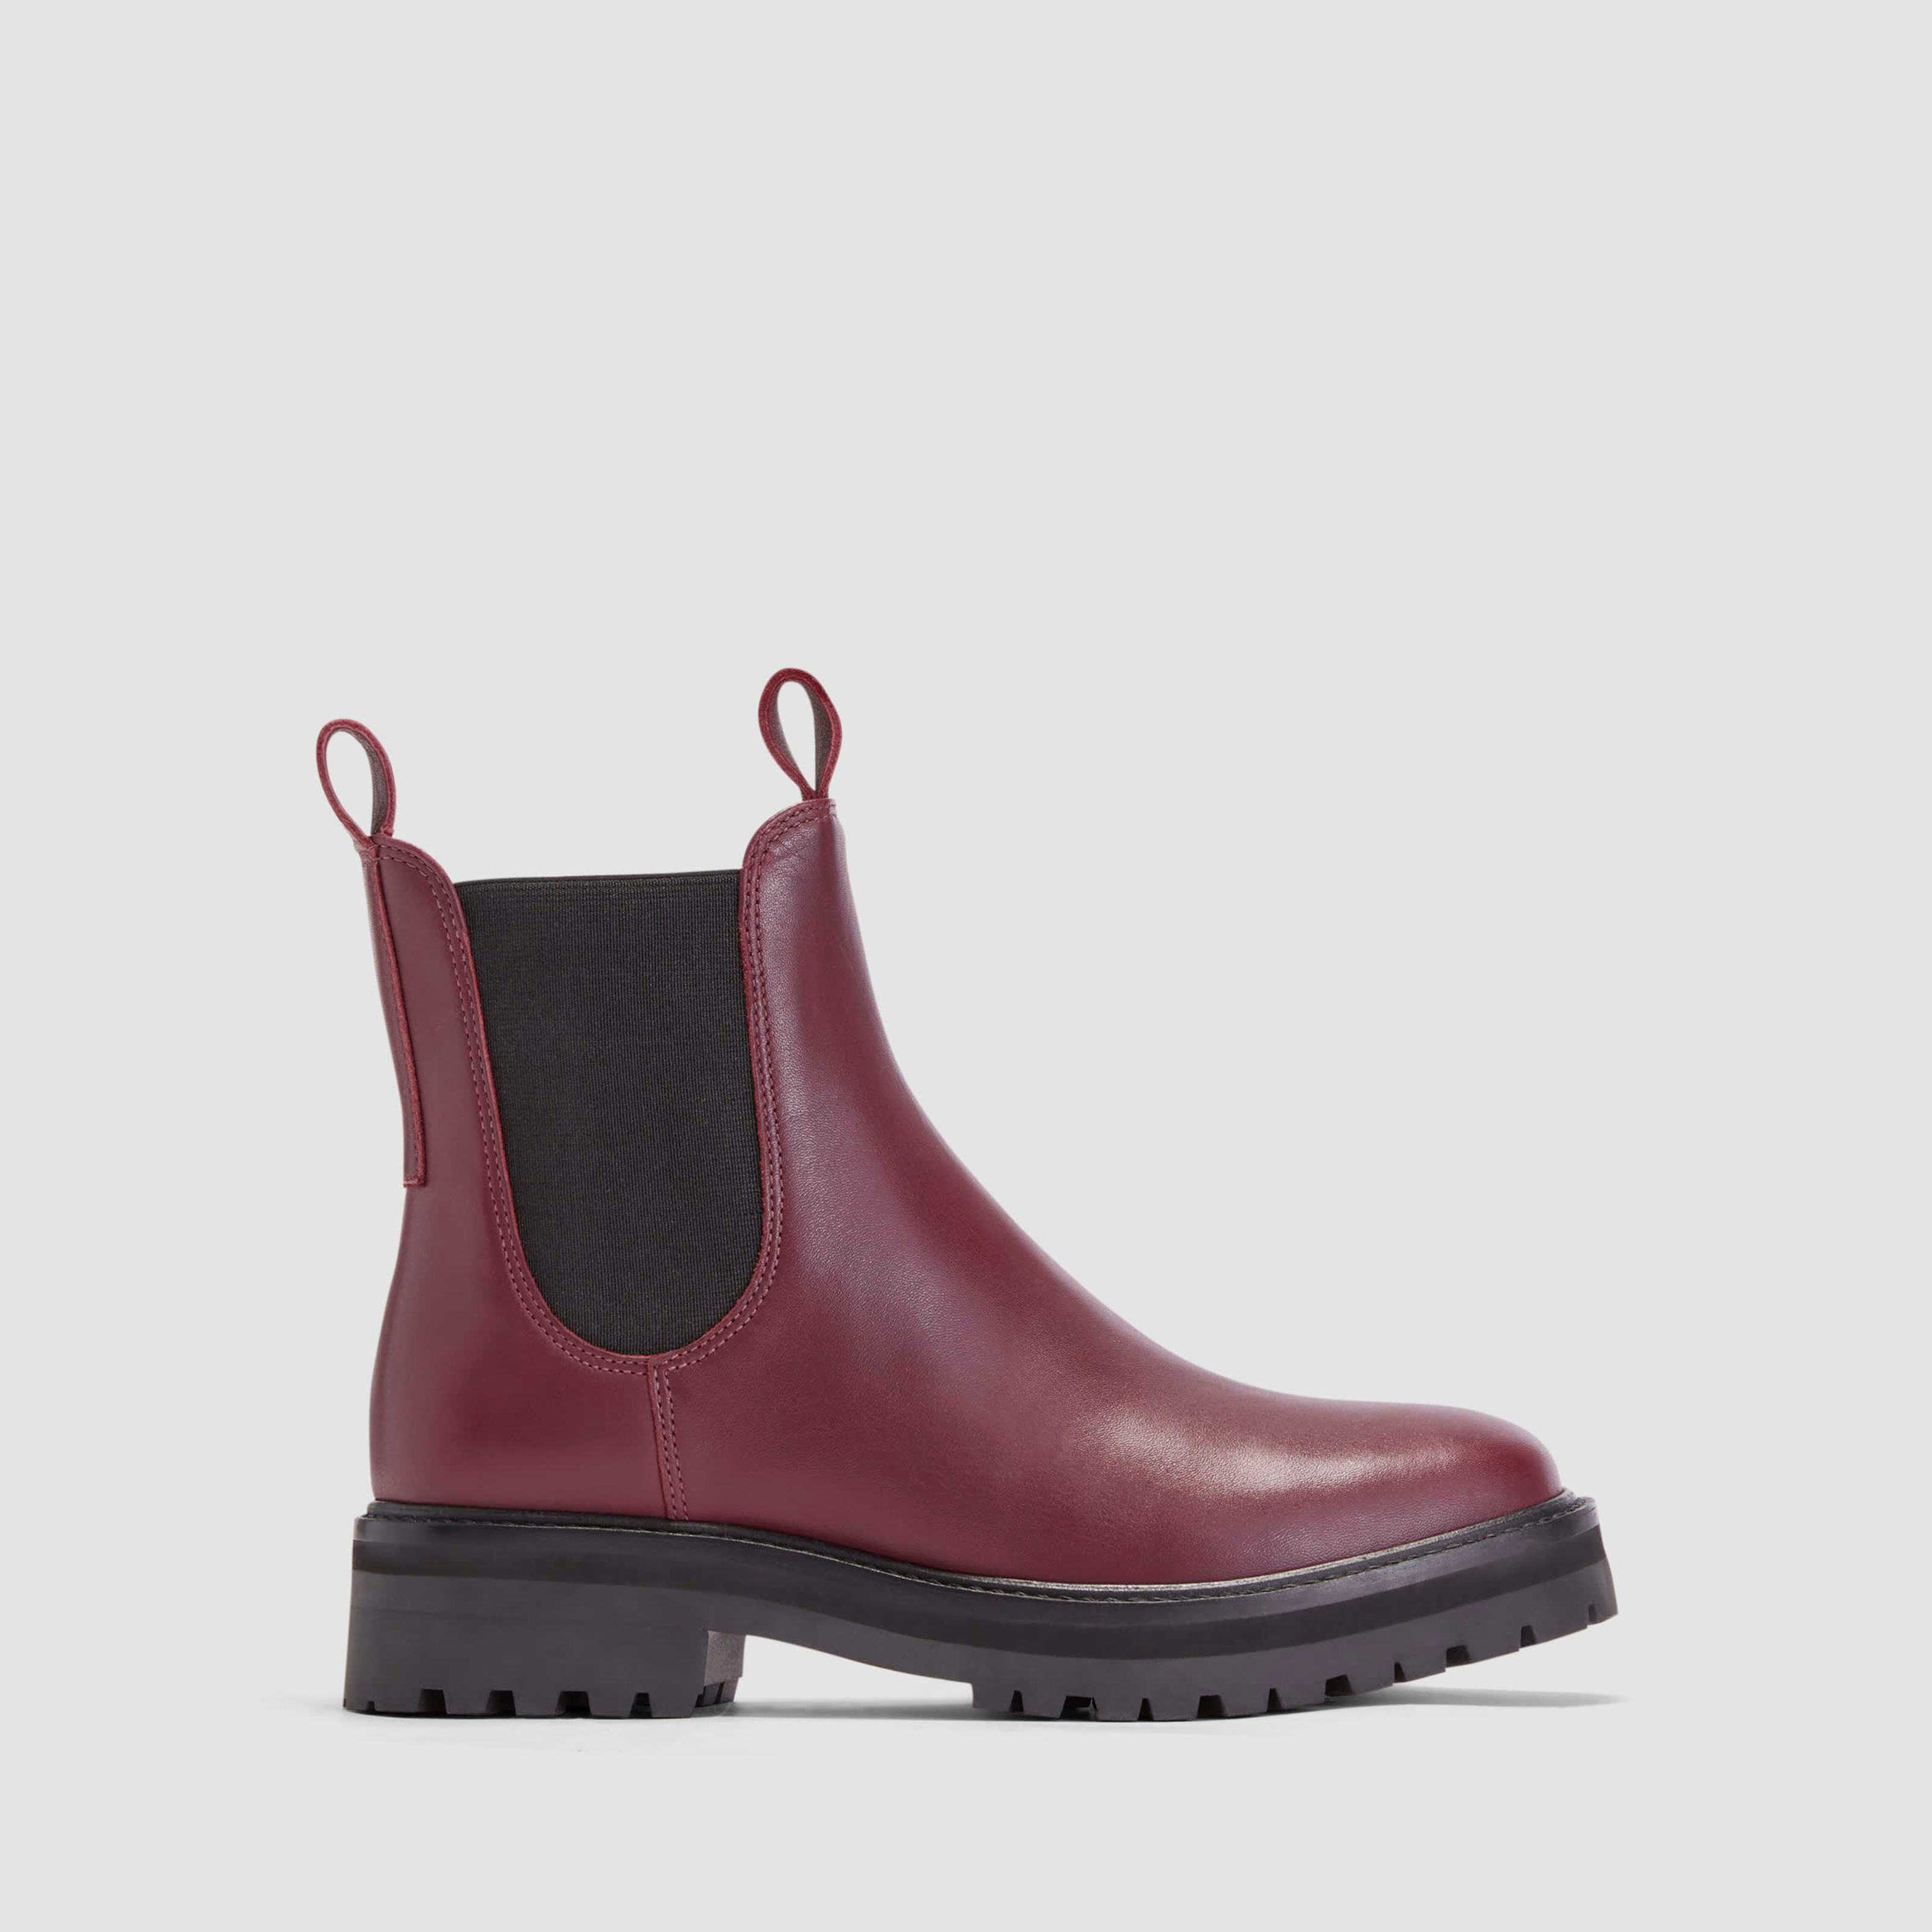 Lug Chelsea Boot by Everlane in Bordeaux, Size 7.5